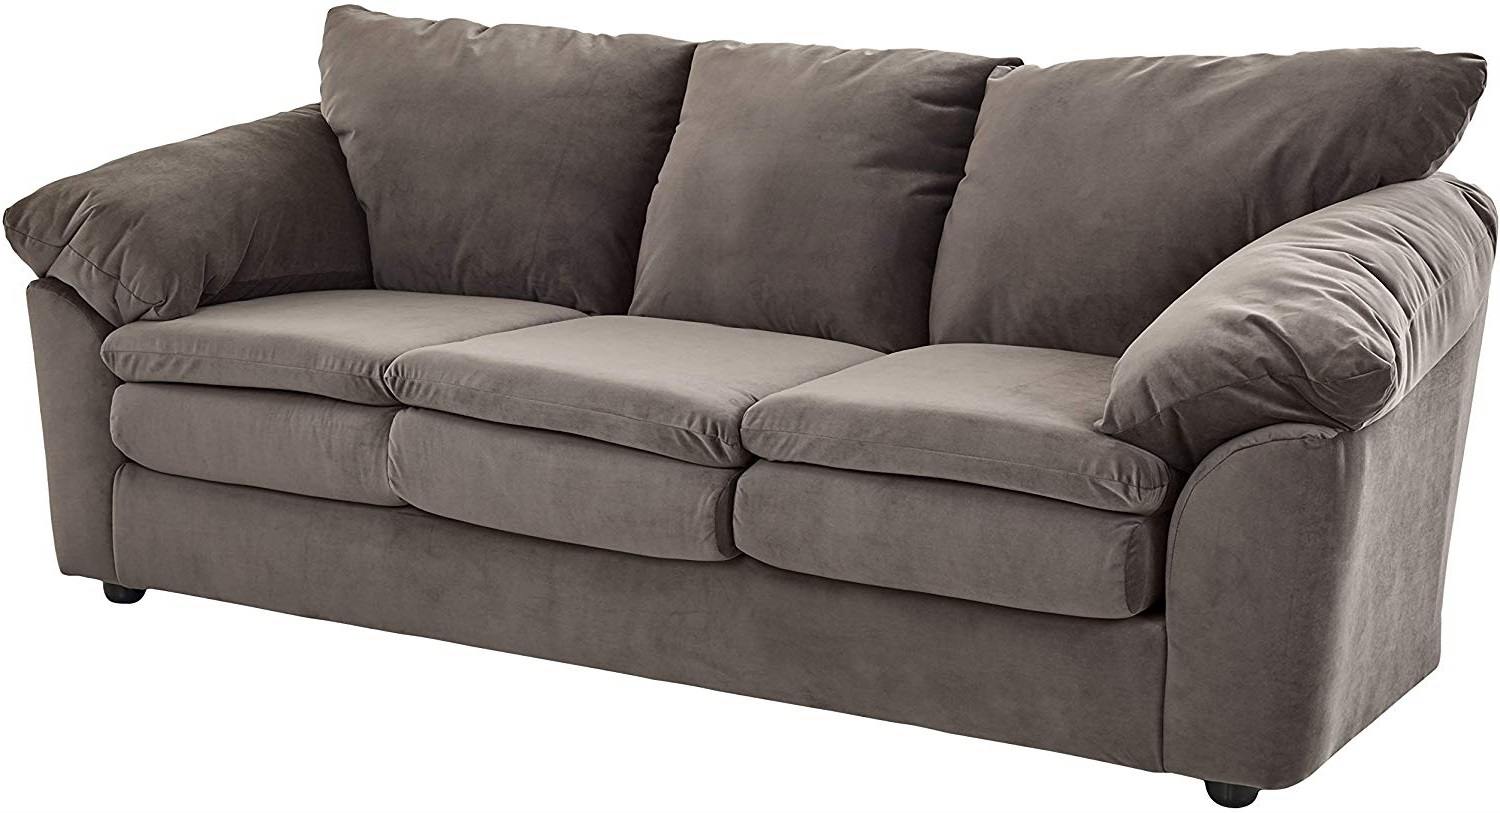 17 Most Comfortable Sofas (2023) 1 Best Couch [Reviews]